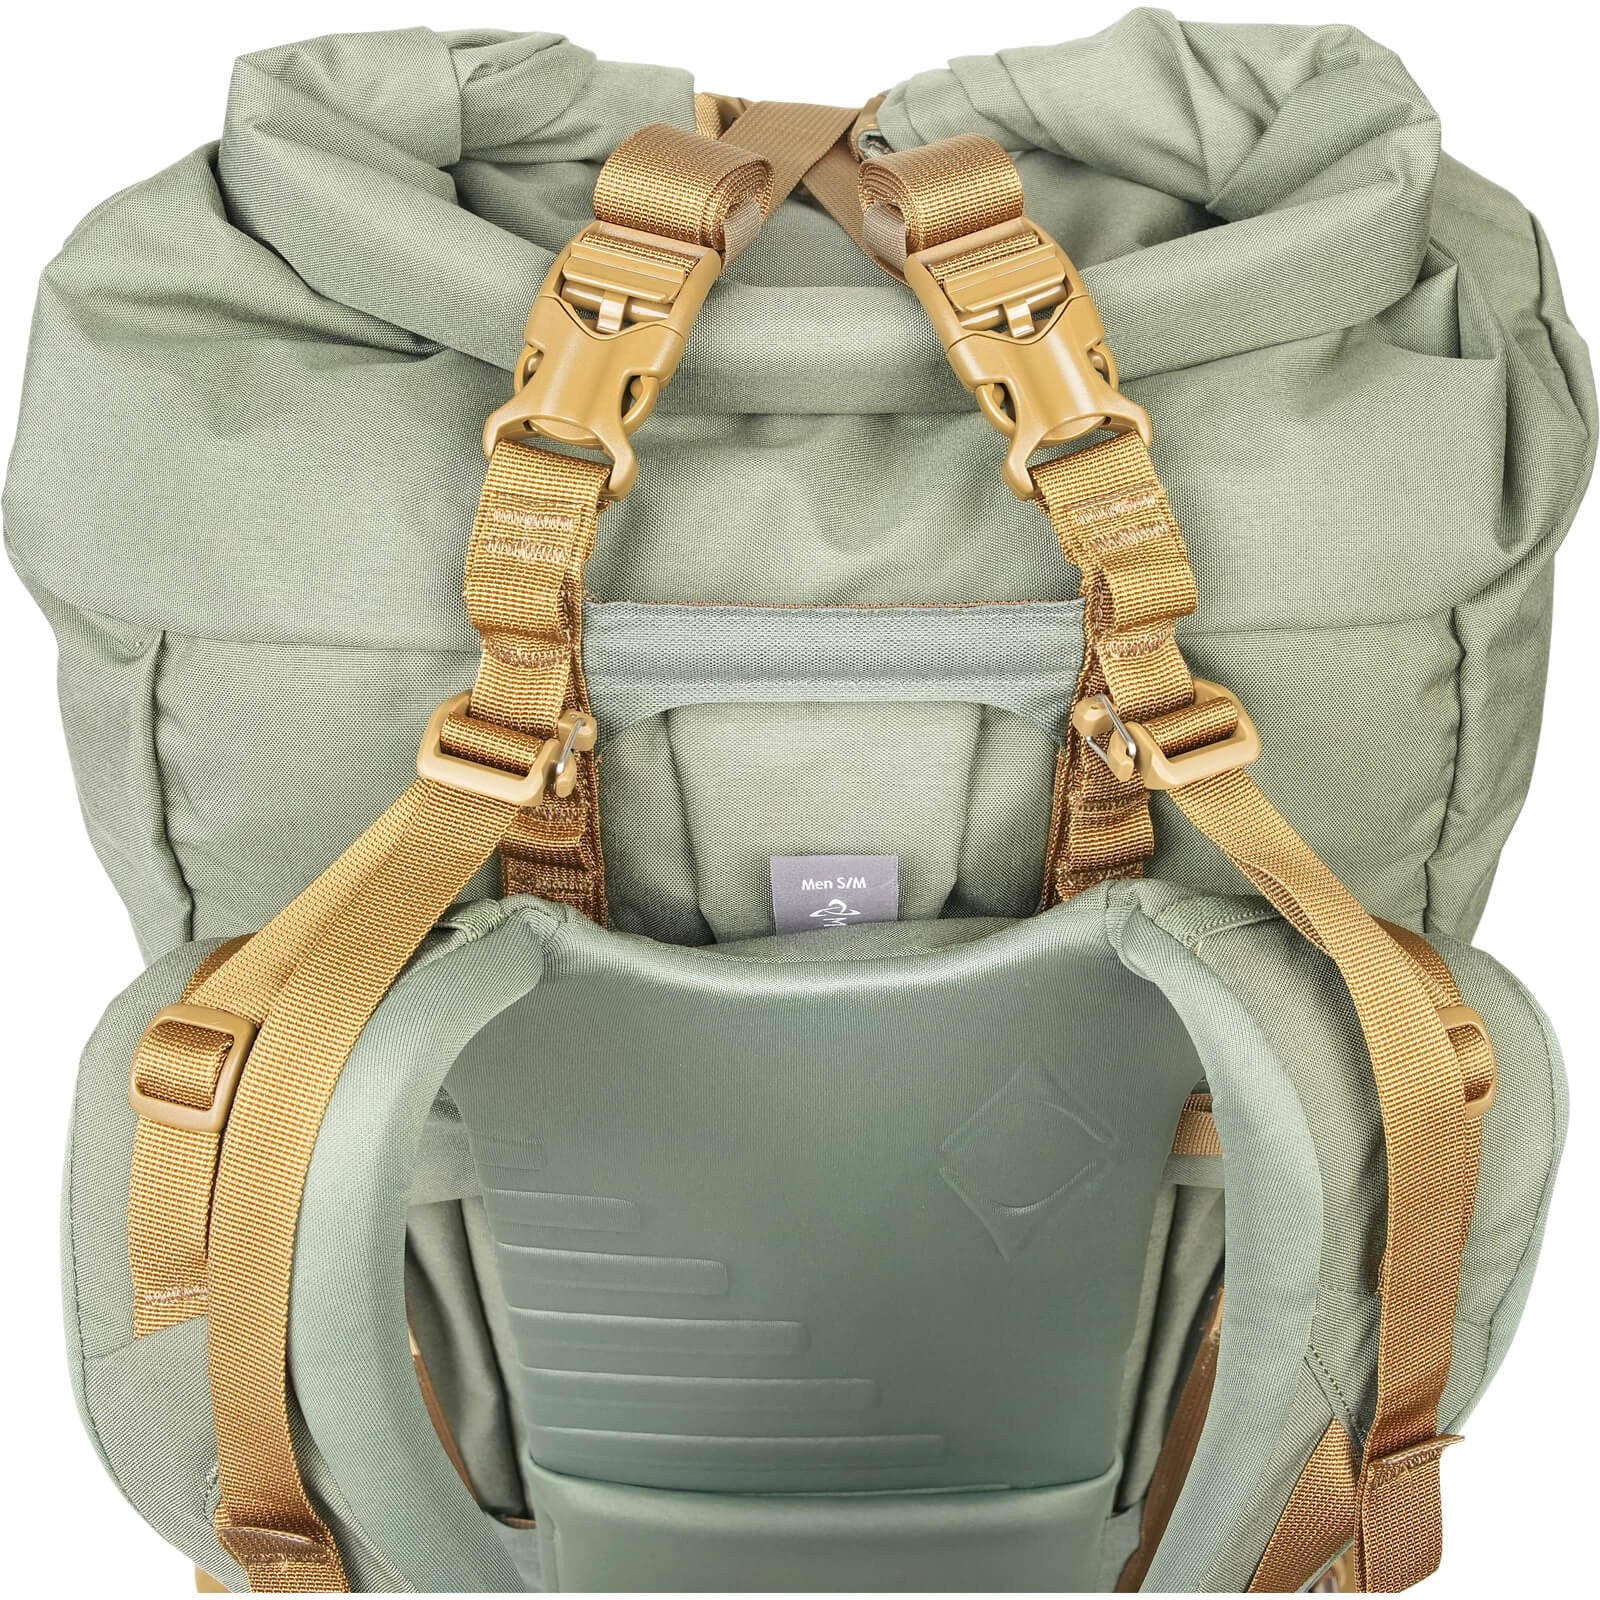 Mystery Ranch Metcalf 75 Men's Backpack -  - Mansfield Hunting & Fishing - Products to prepare for Corona Virus